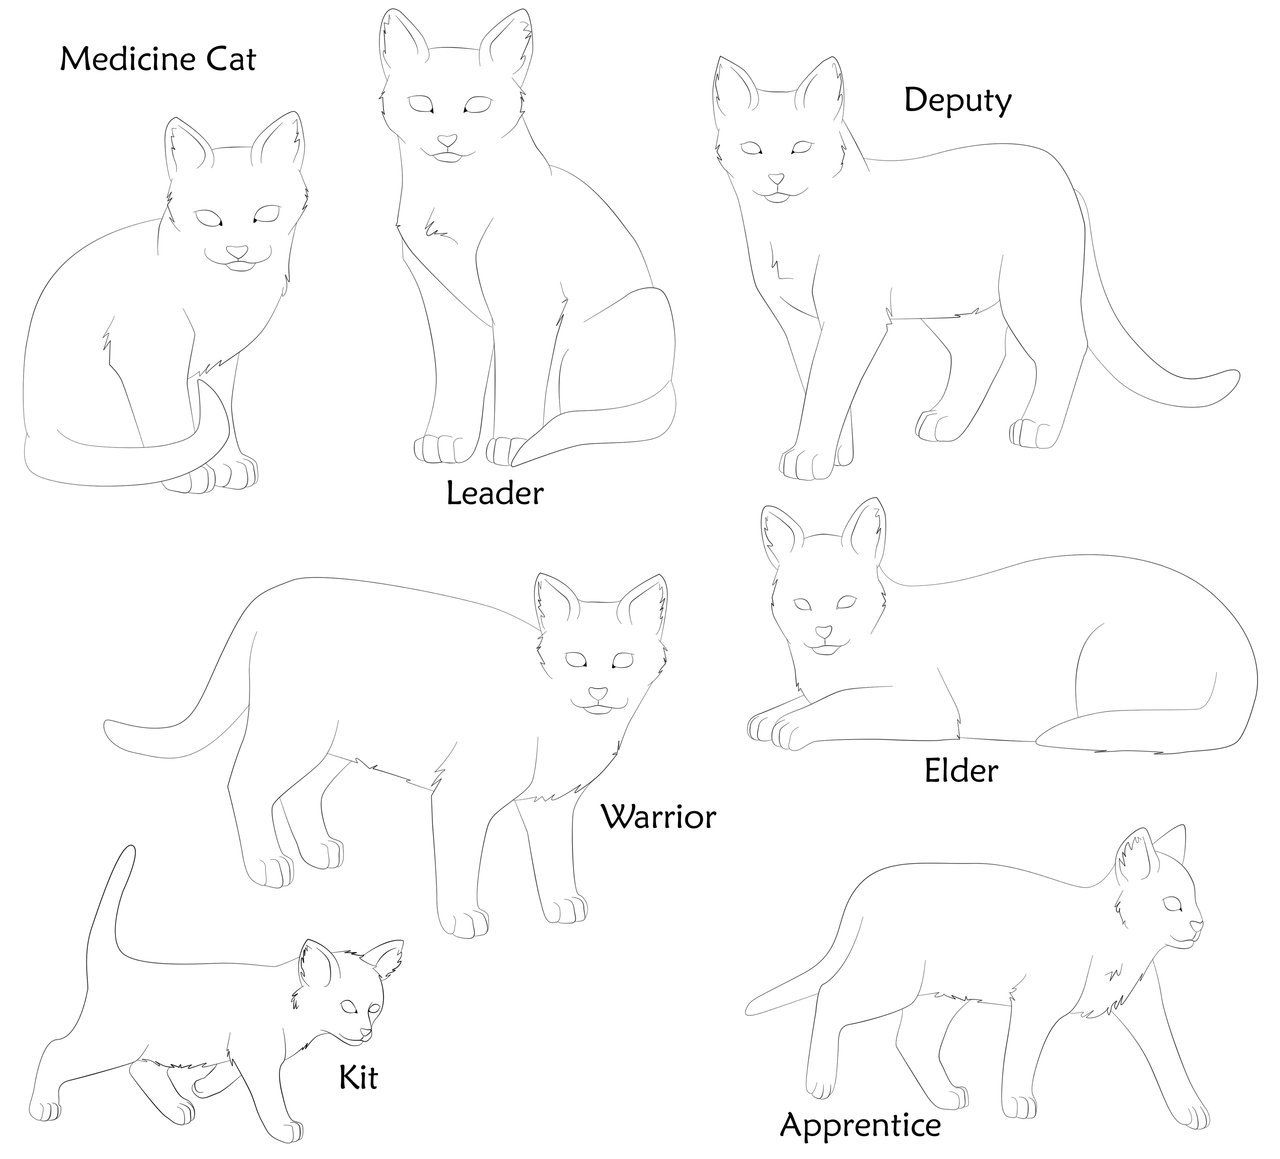 8 Best Images of Warrior Cats Coloring Pages Printable - Warrior ...